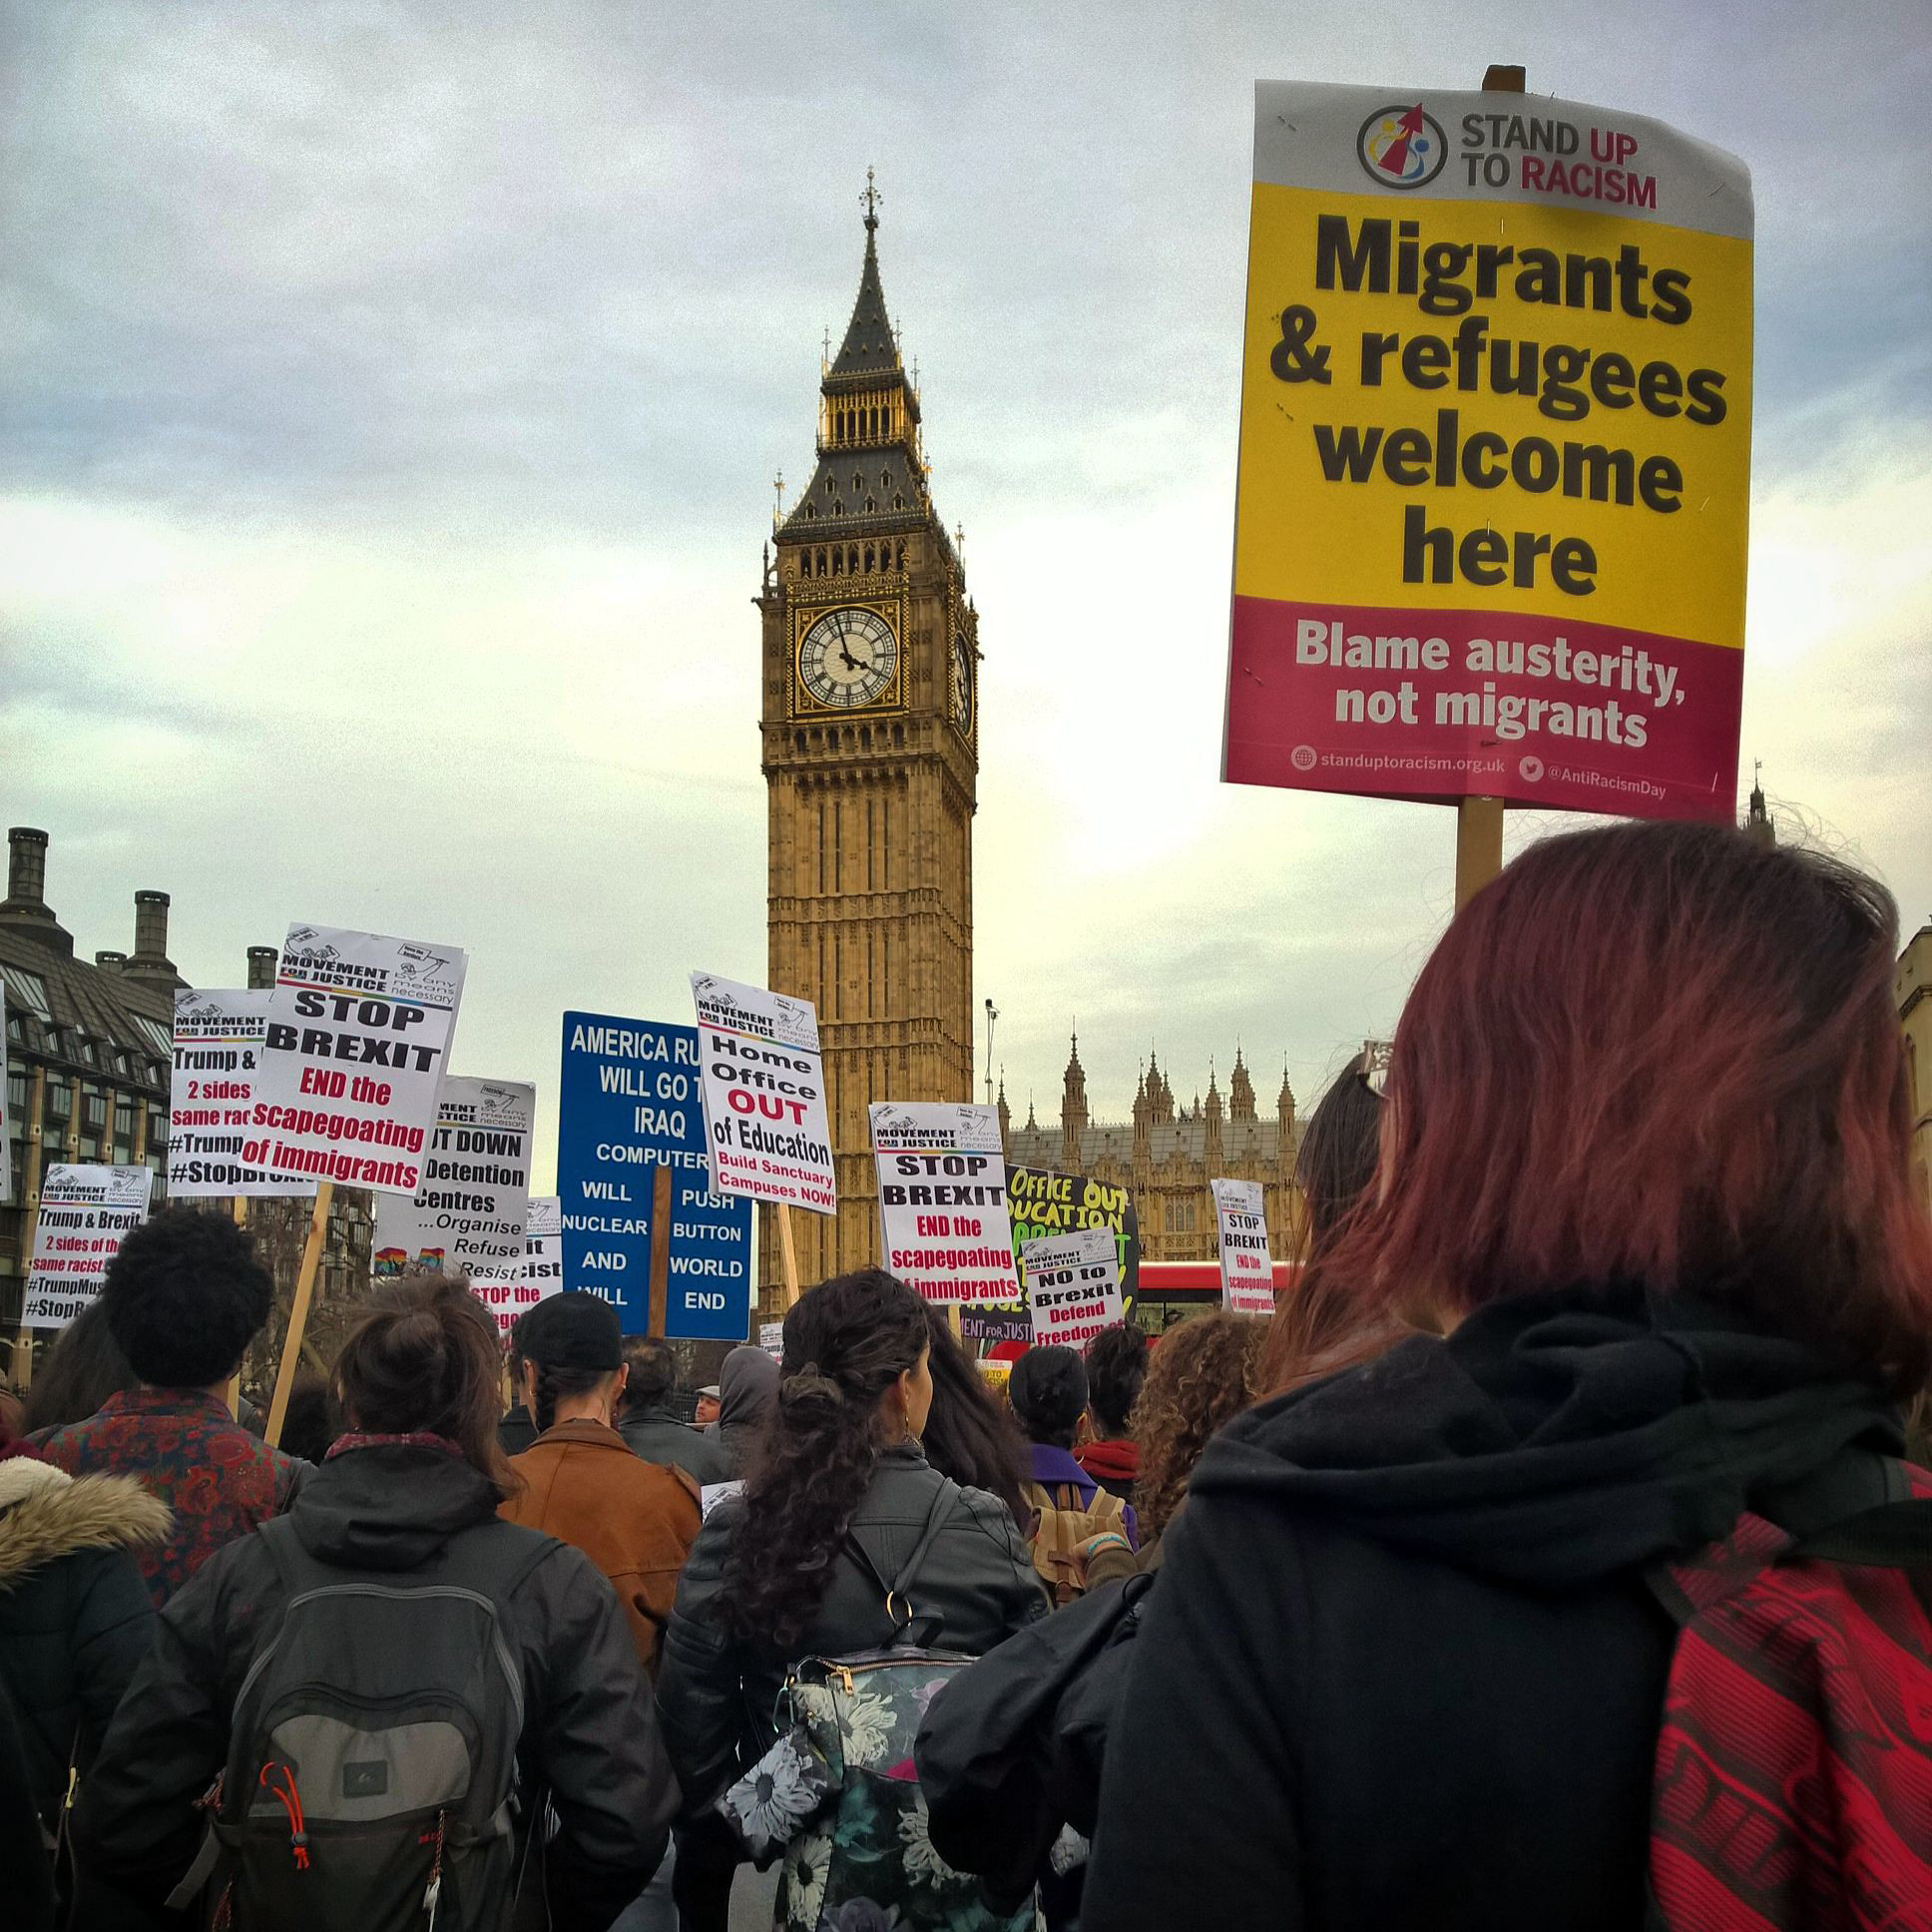 A protest sign reads "refugees and migrants welcome here" in black lettering on a yellow protest sign. The sign is held a loft a crowd of other protestors with the Big Ben clock tower looming in the background. 